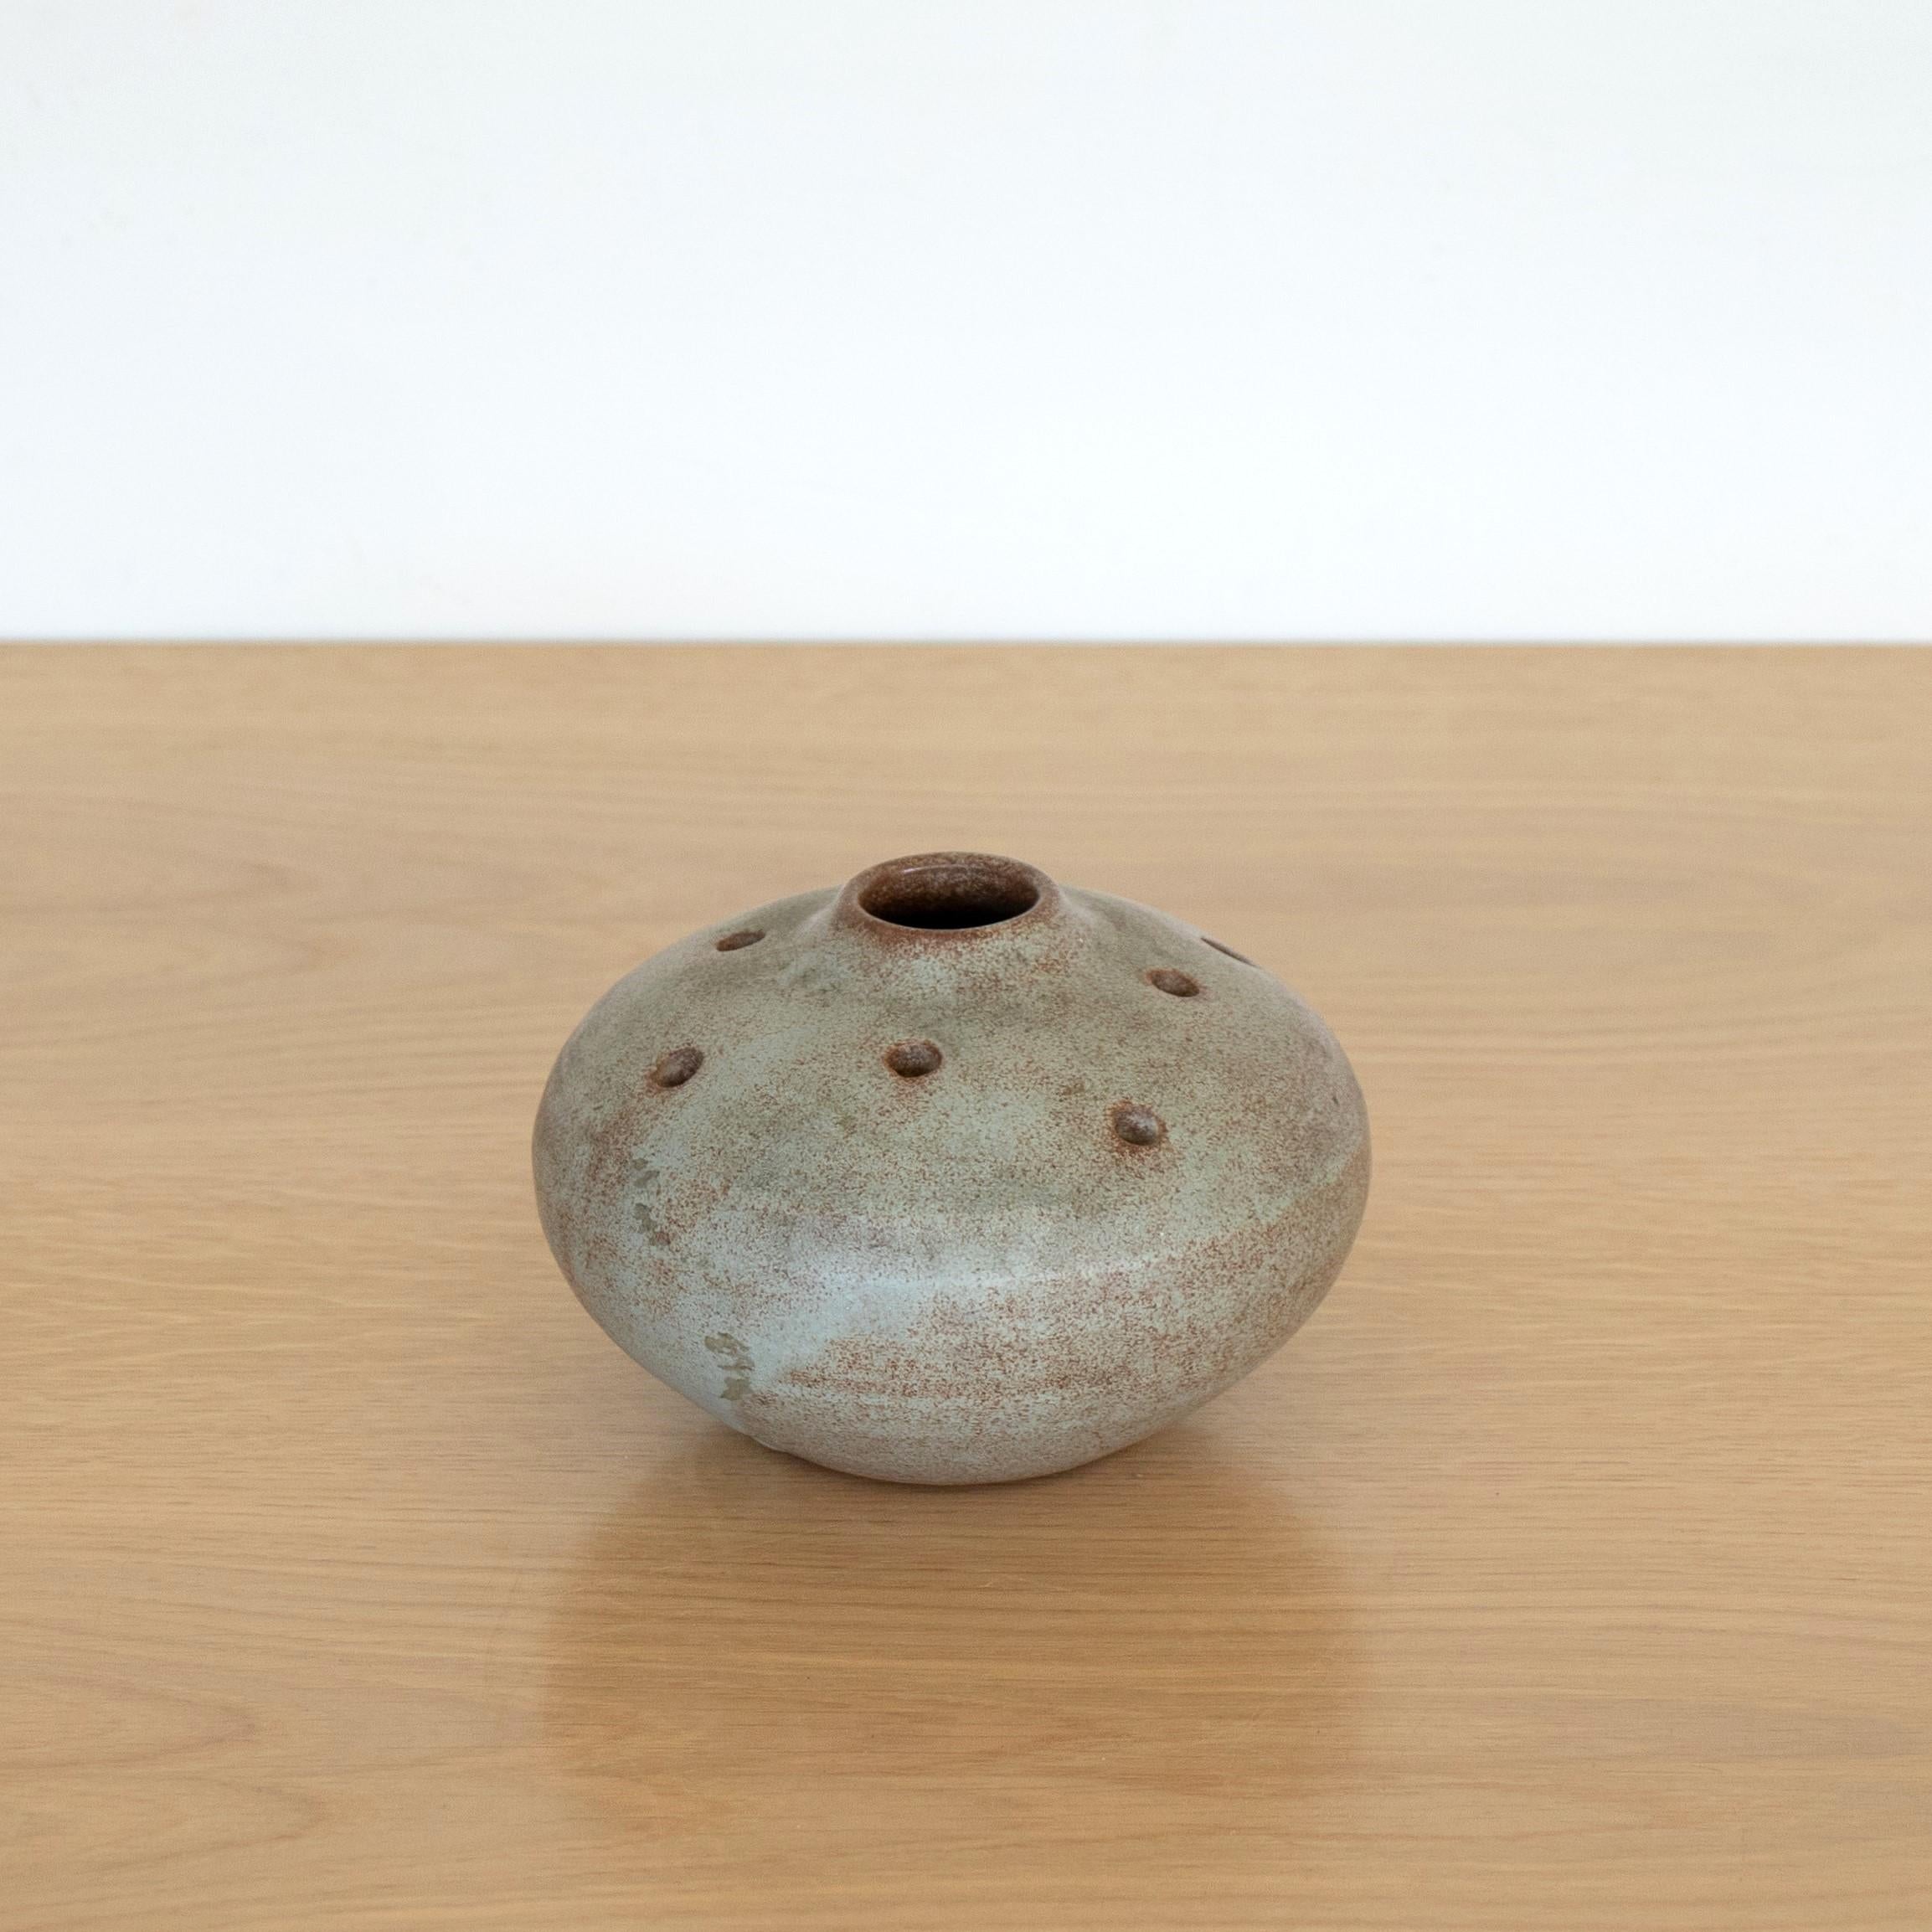 Great ceramic bud vase from France, 1950's. Petite round vessel with holes speckled in a natural grey glaze. Perfect as a bud vase or decorative object. 